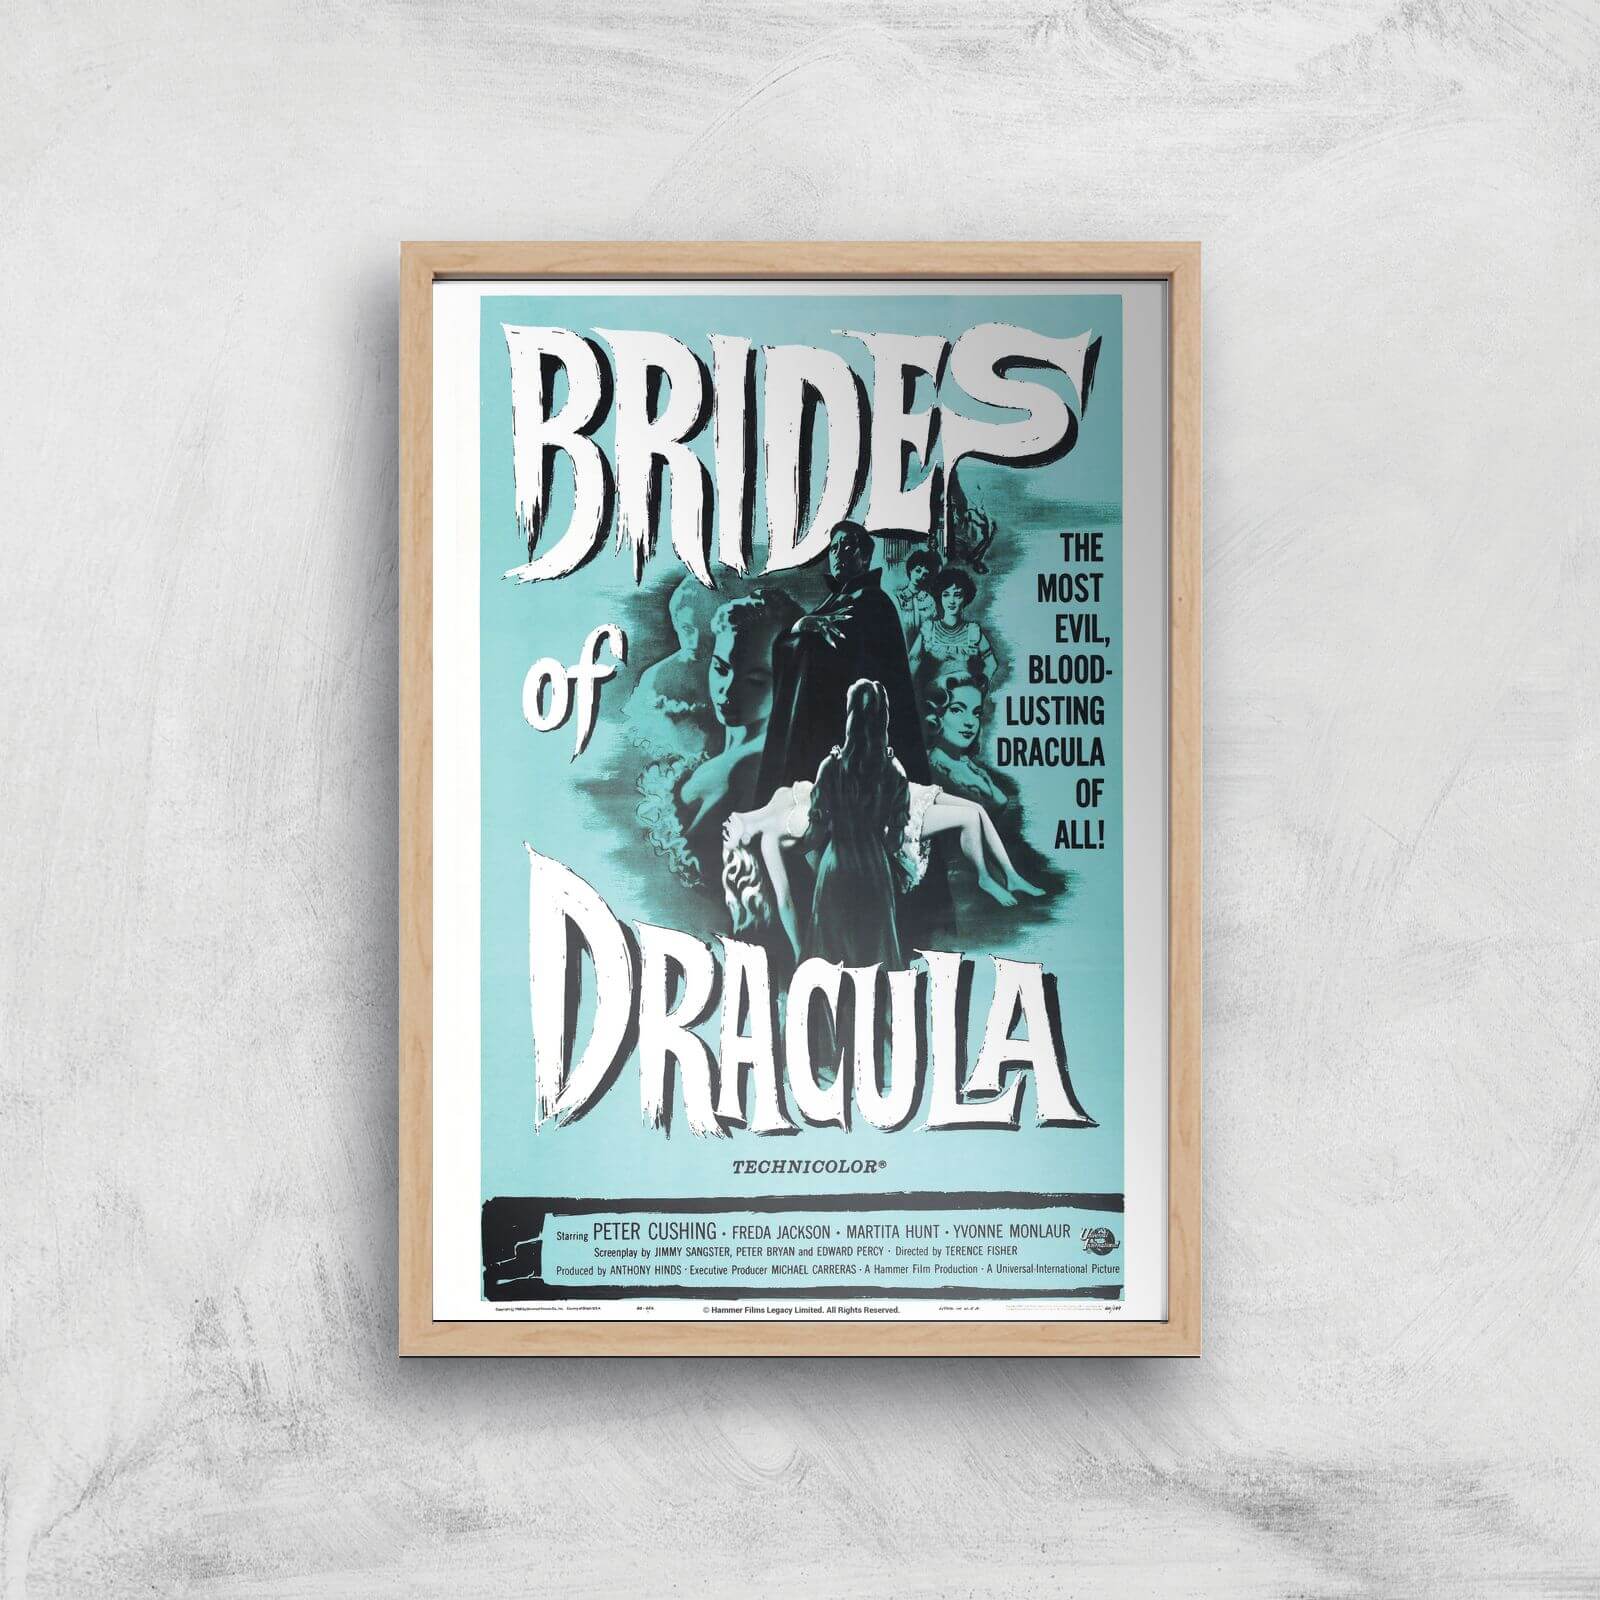 Brides Of Dracula Giclee Art Print - A2 - Wooden Frame